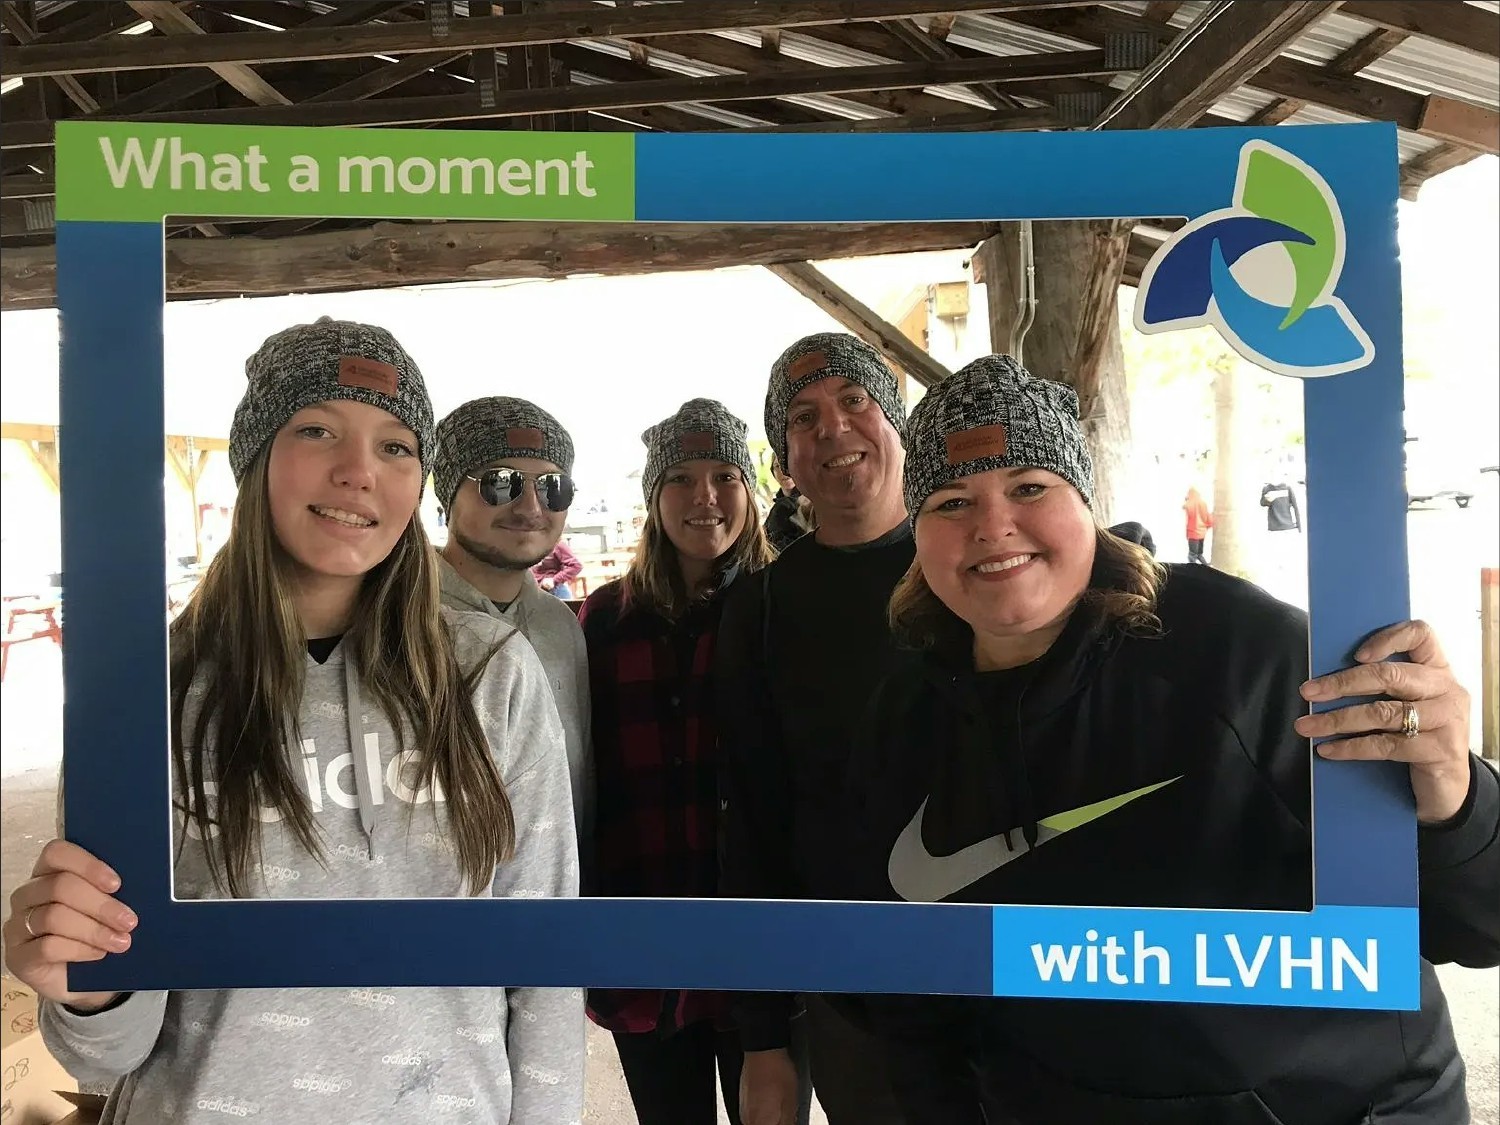 LVHN holds Colleague Days at local amusement parks for colleagues and family to unwind, have fun and pick up free swag.